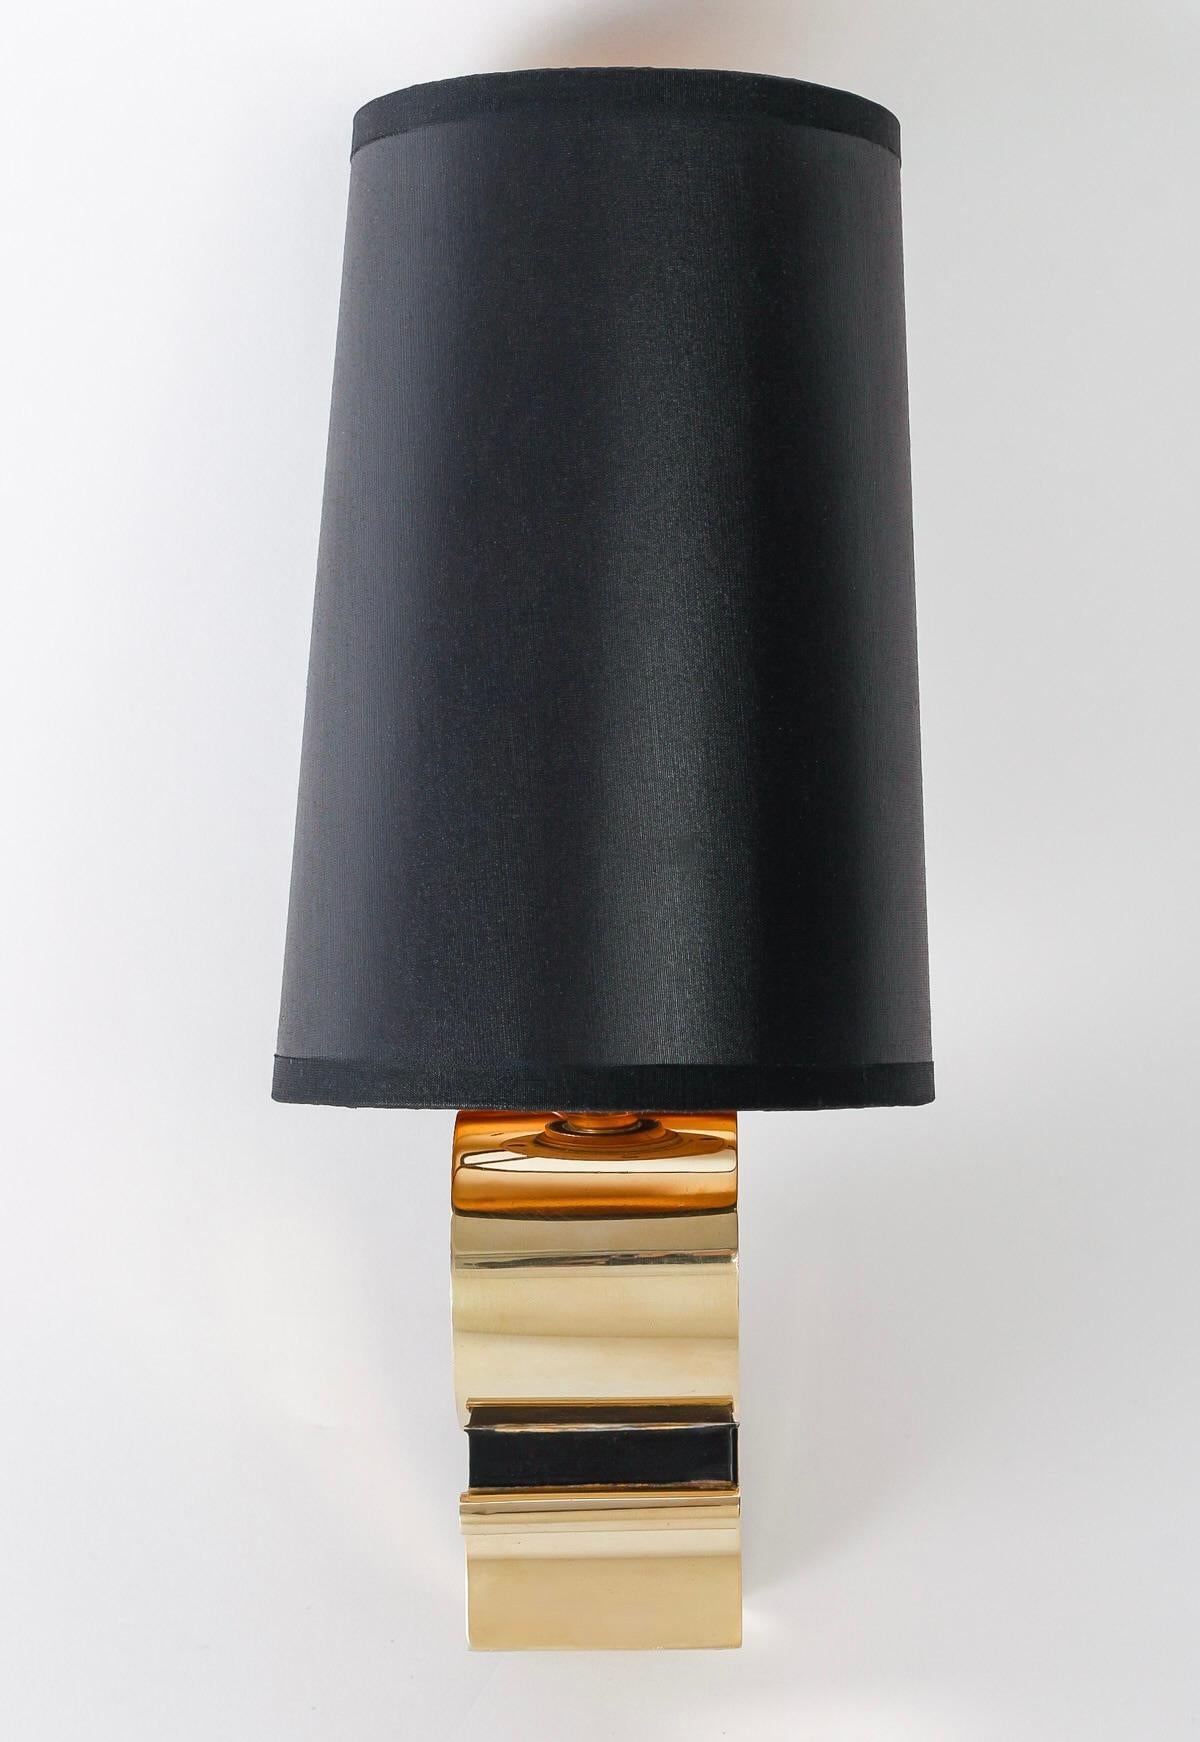 Composed of a rectangular gilded bronze wall bracket on which rests the gilded and blackened bronze baluster-shaped light arm.
The top of the baluster is adorned with a trapezoidal lampshade in black cotton on the outside and gilded on the